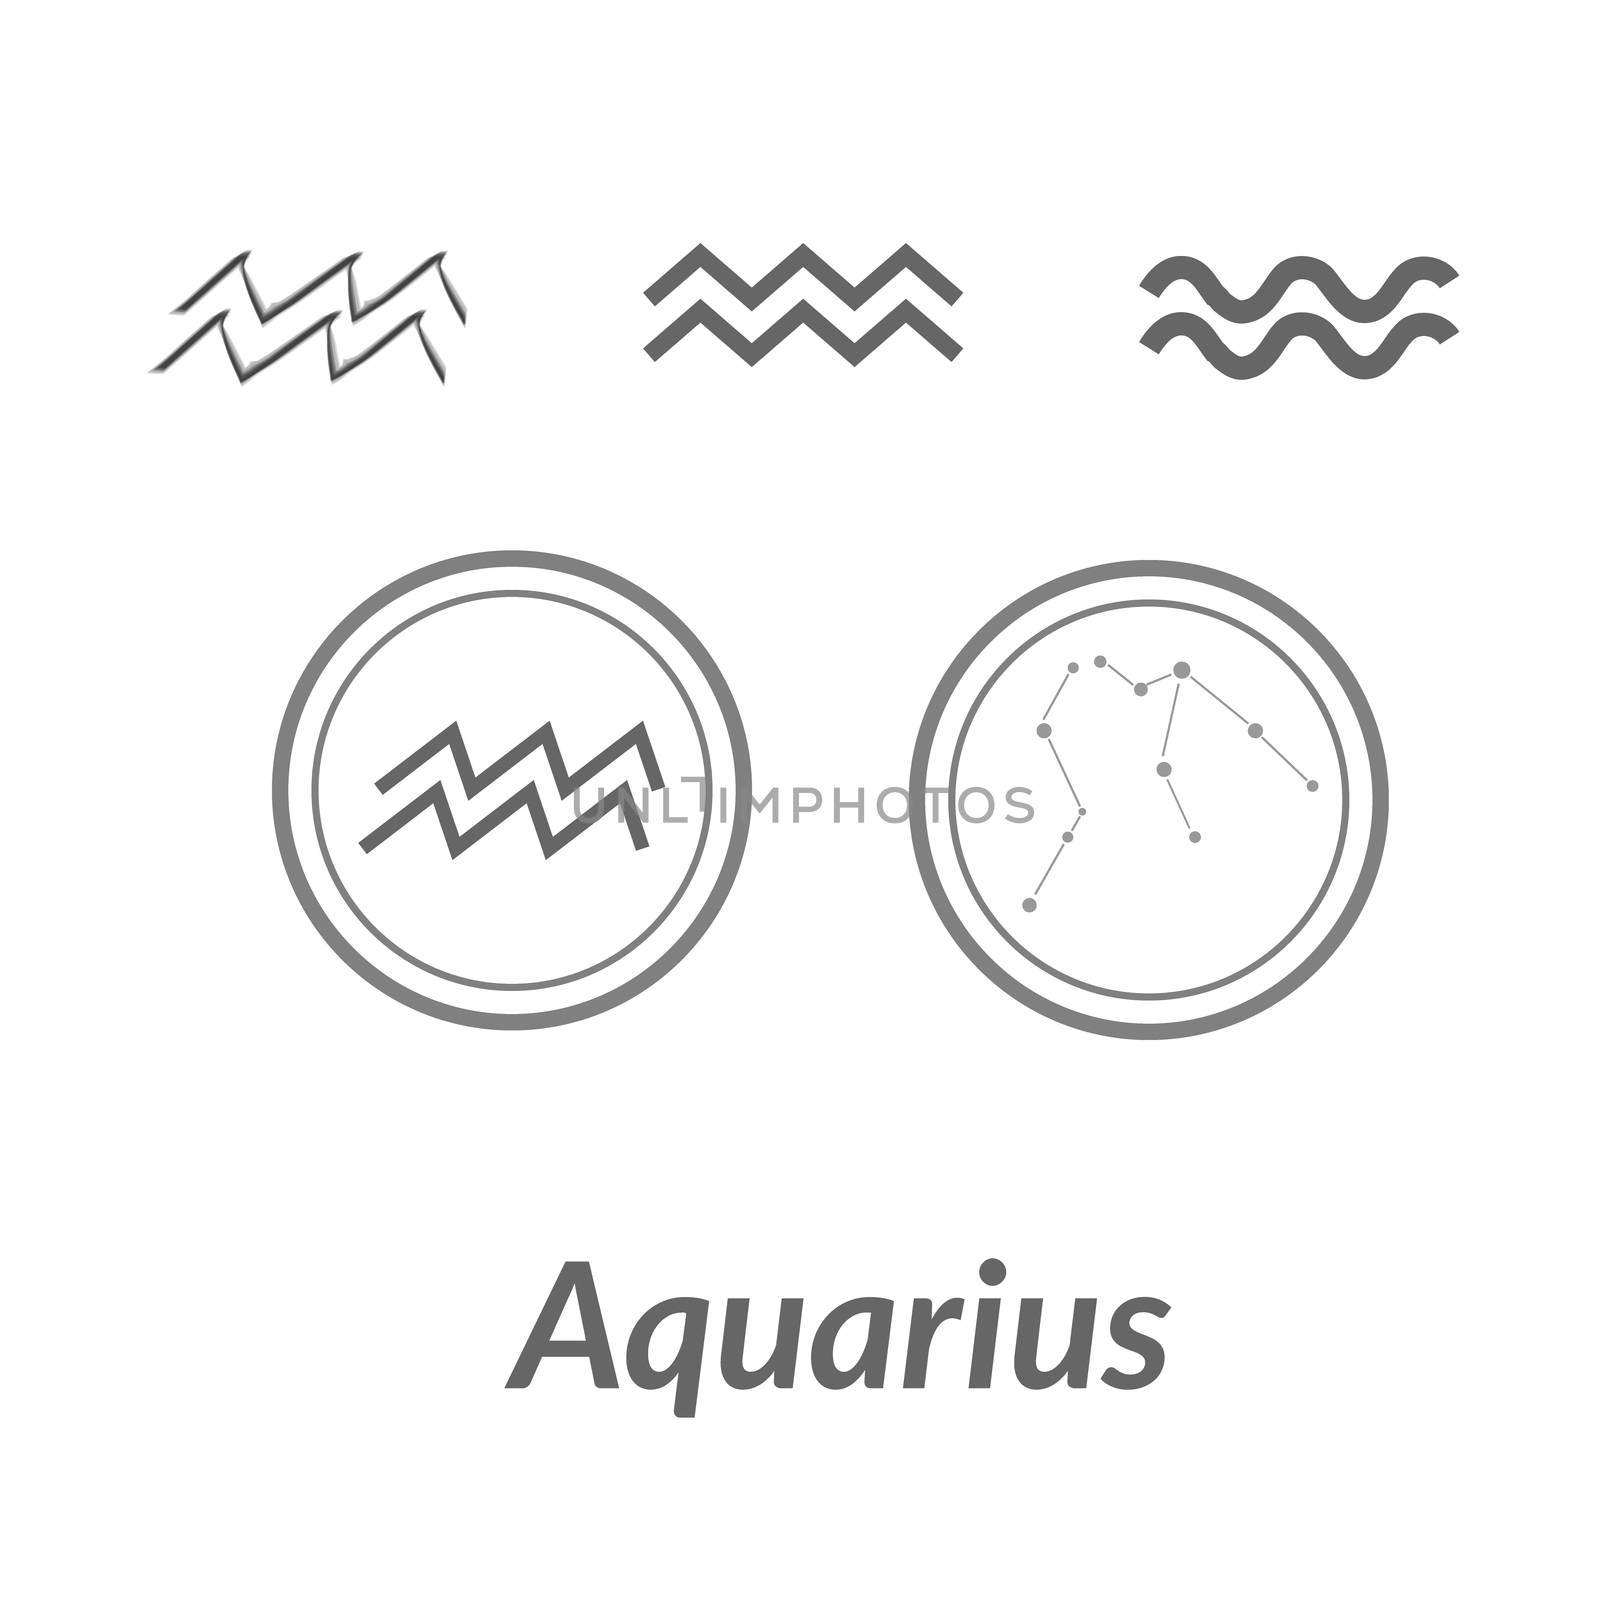 The Water-Bearer aquarius sing. Star constellation element. Age of aquarius constellation zodiac symbol on light background. by Asnia